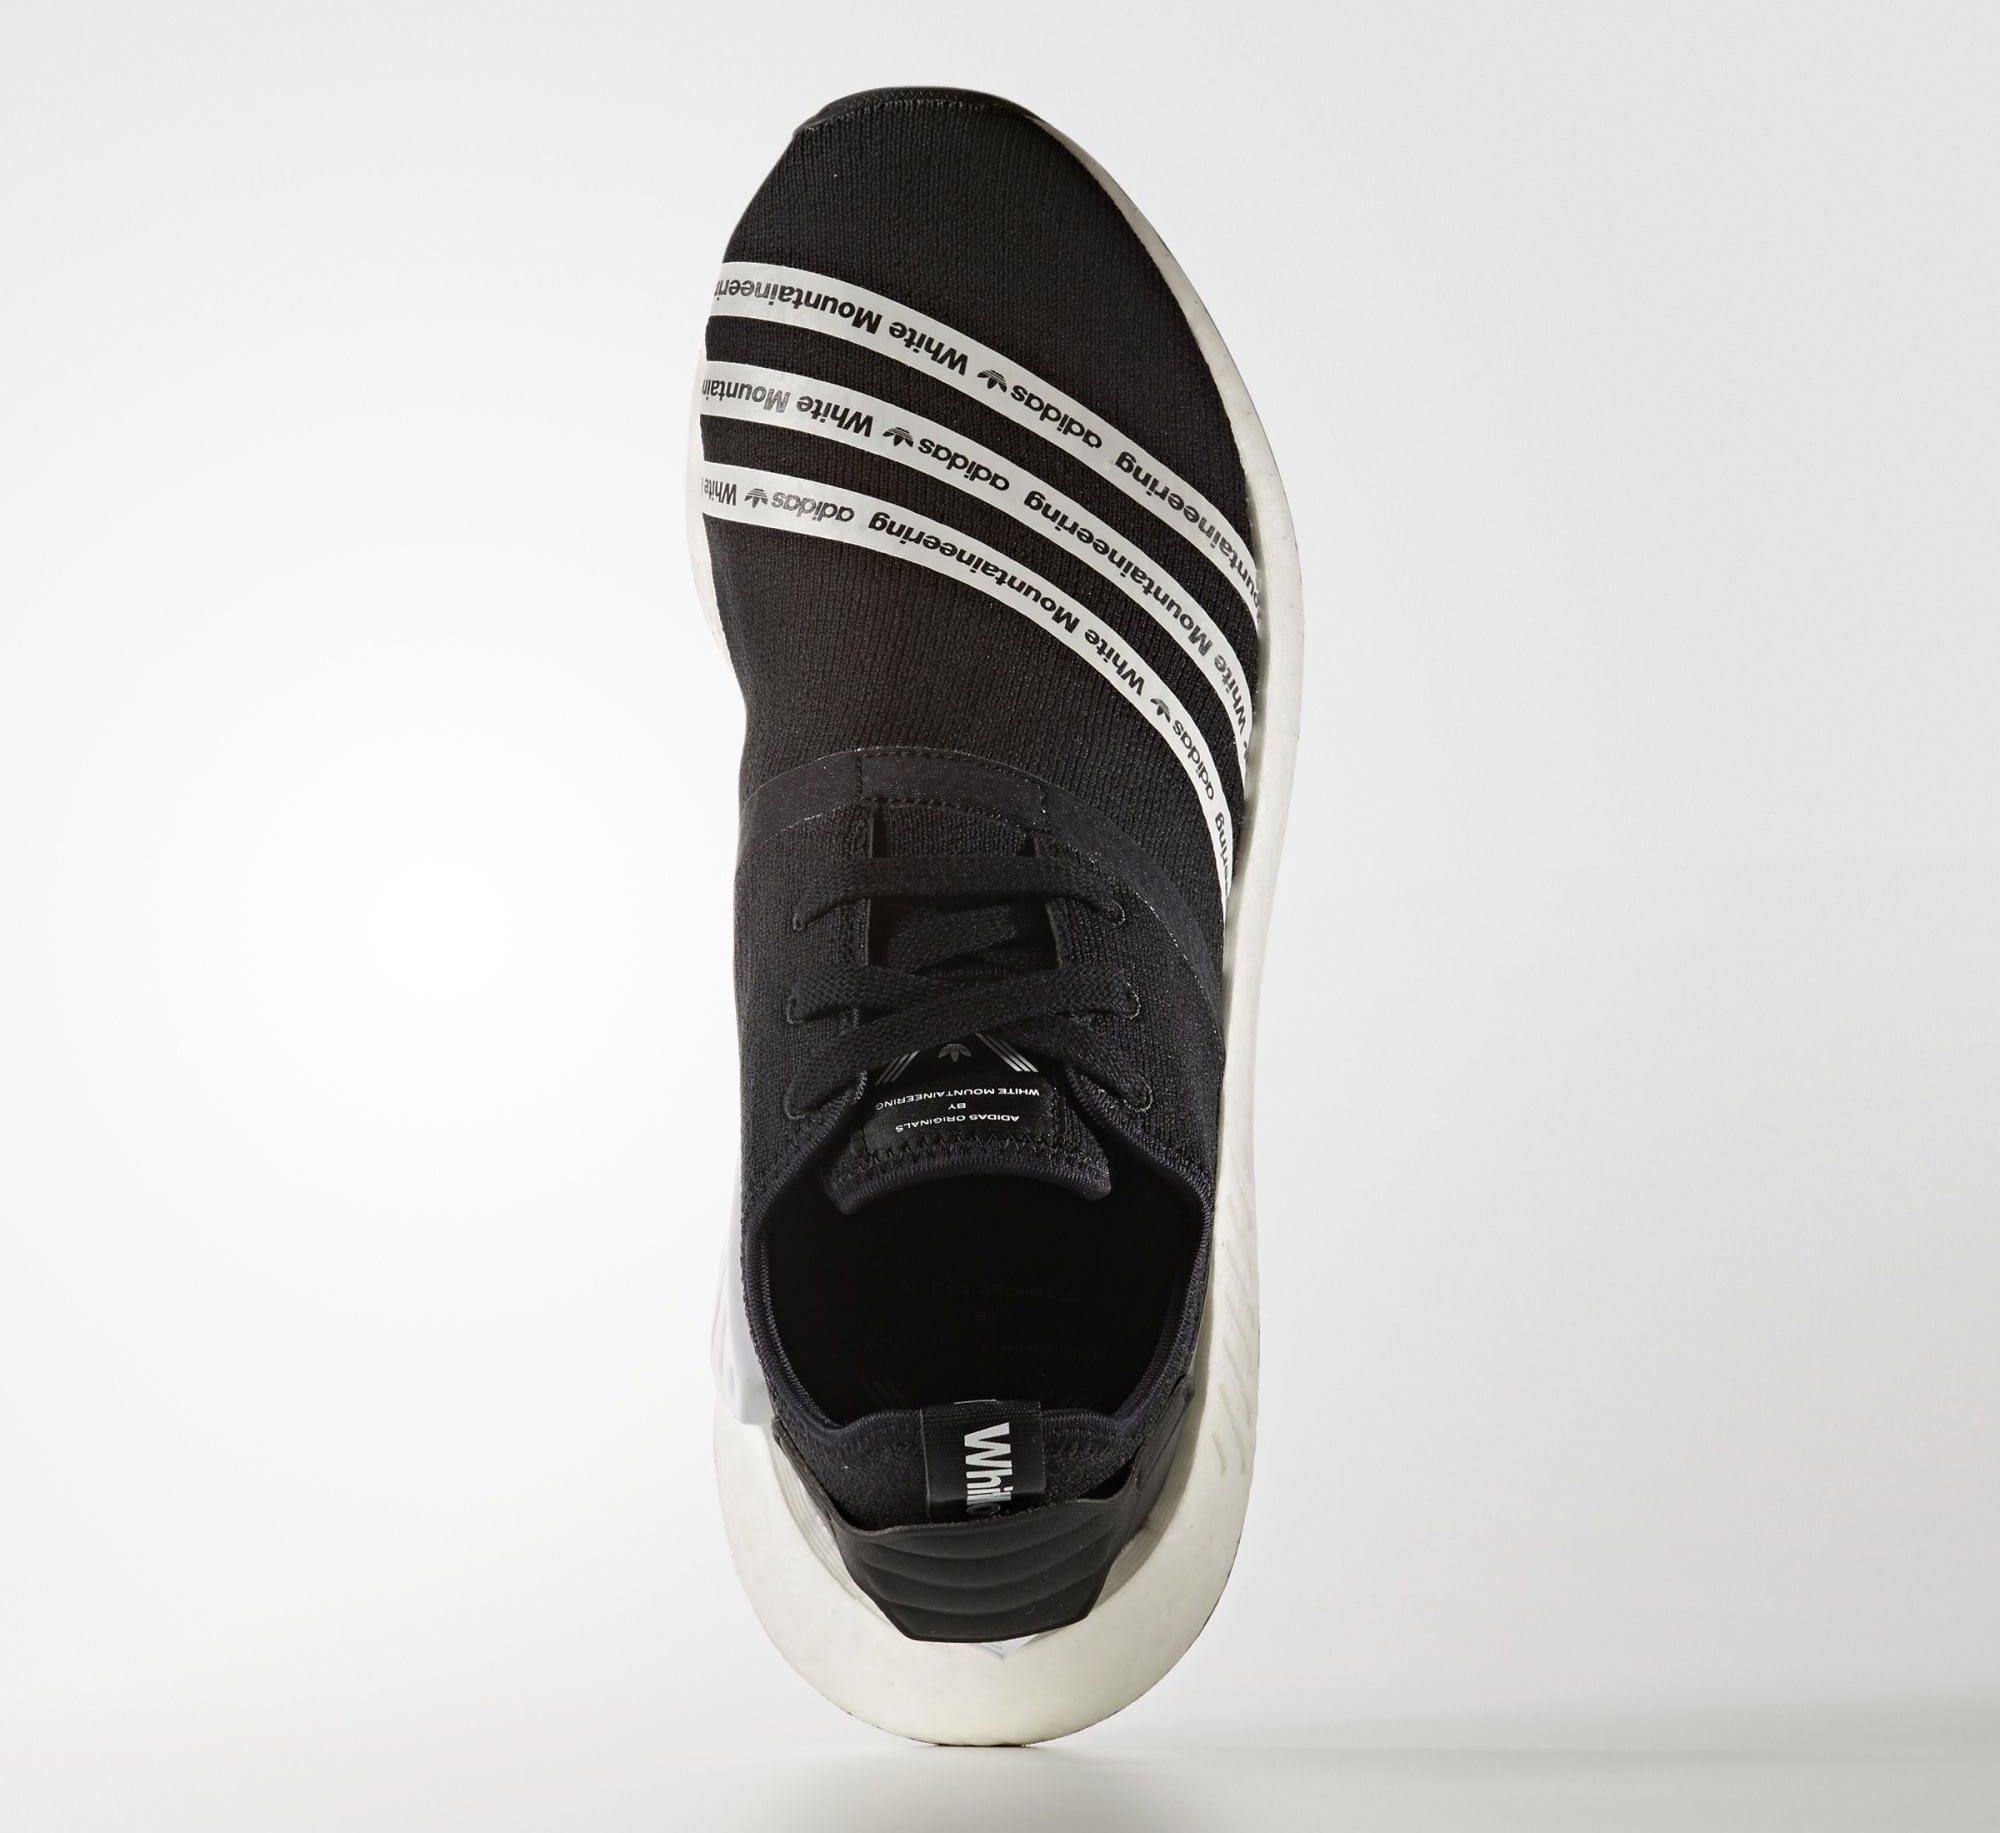 White Mountaineering Adidas NMD R2 BB2978 Top